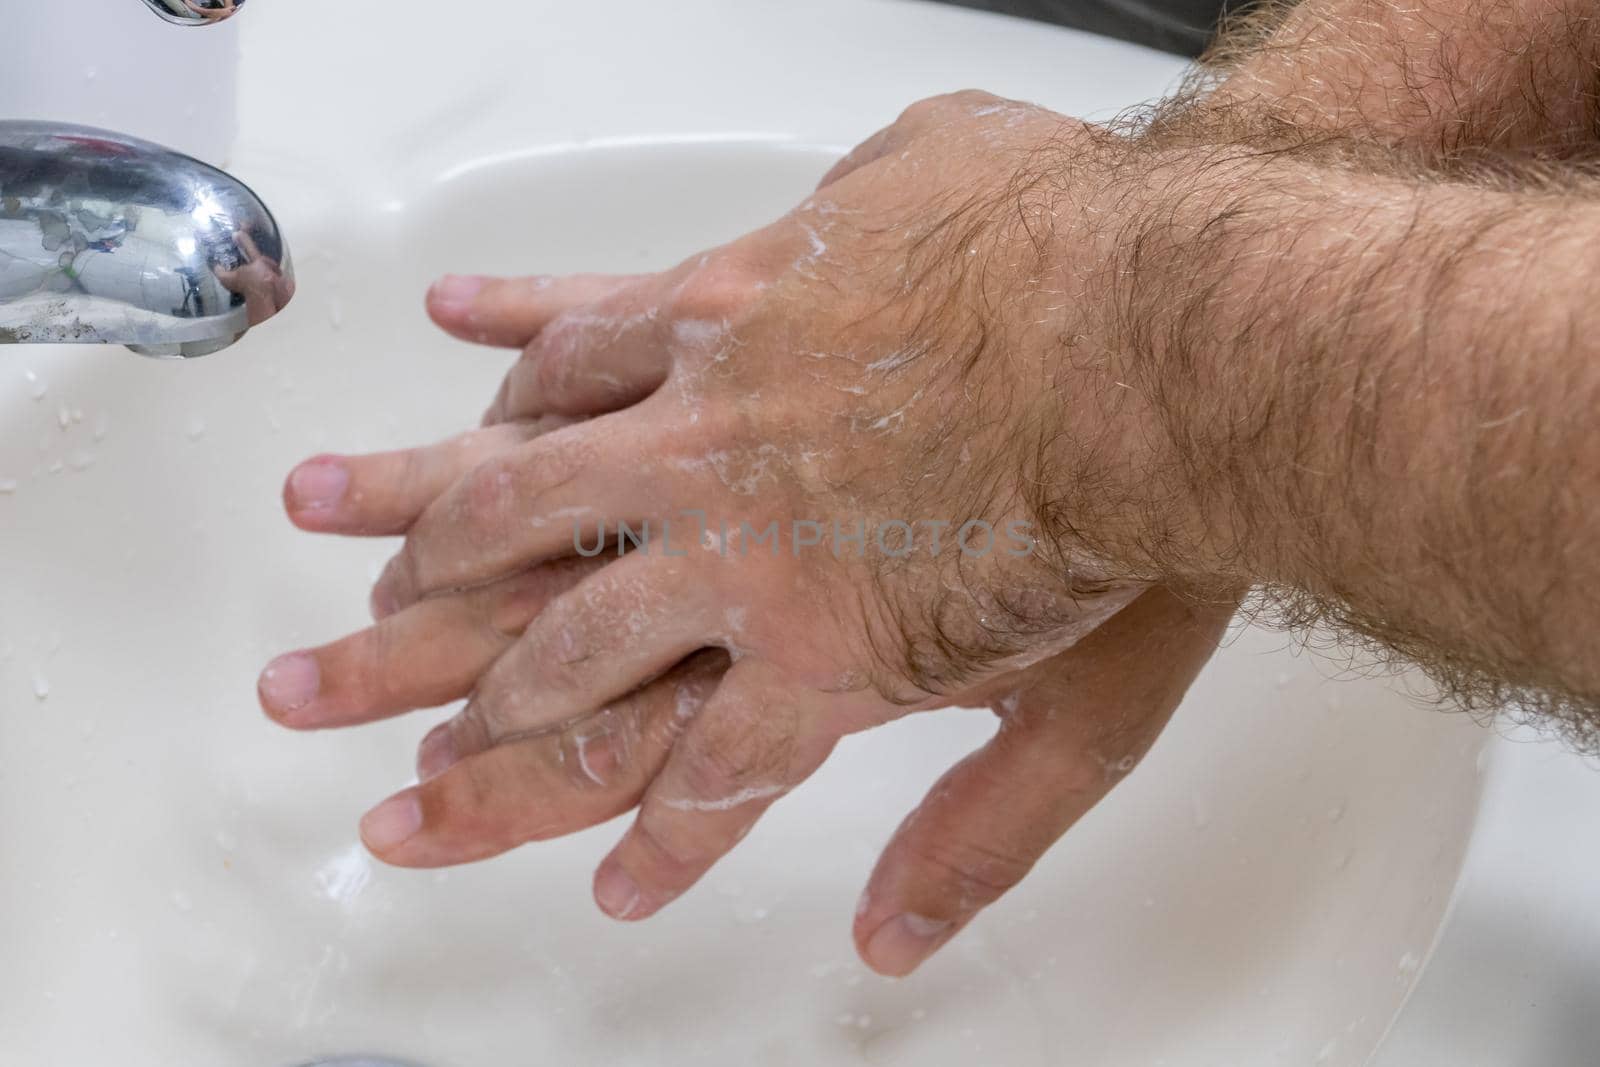 Man washing hands in basin close-up, one of several in handwashing steps series